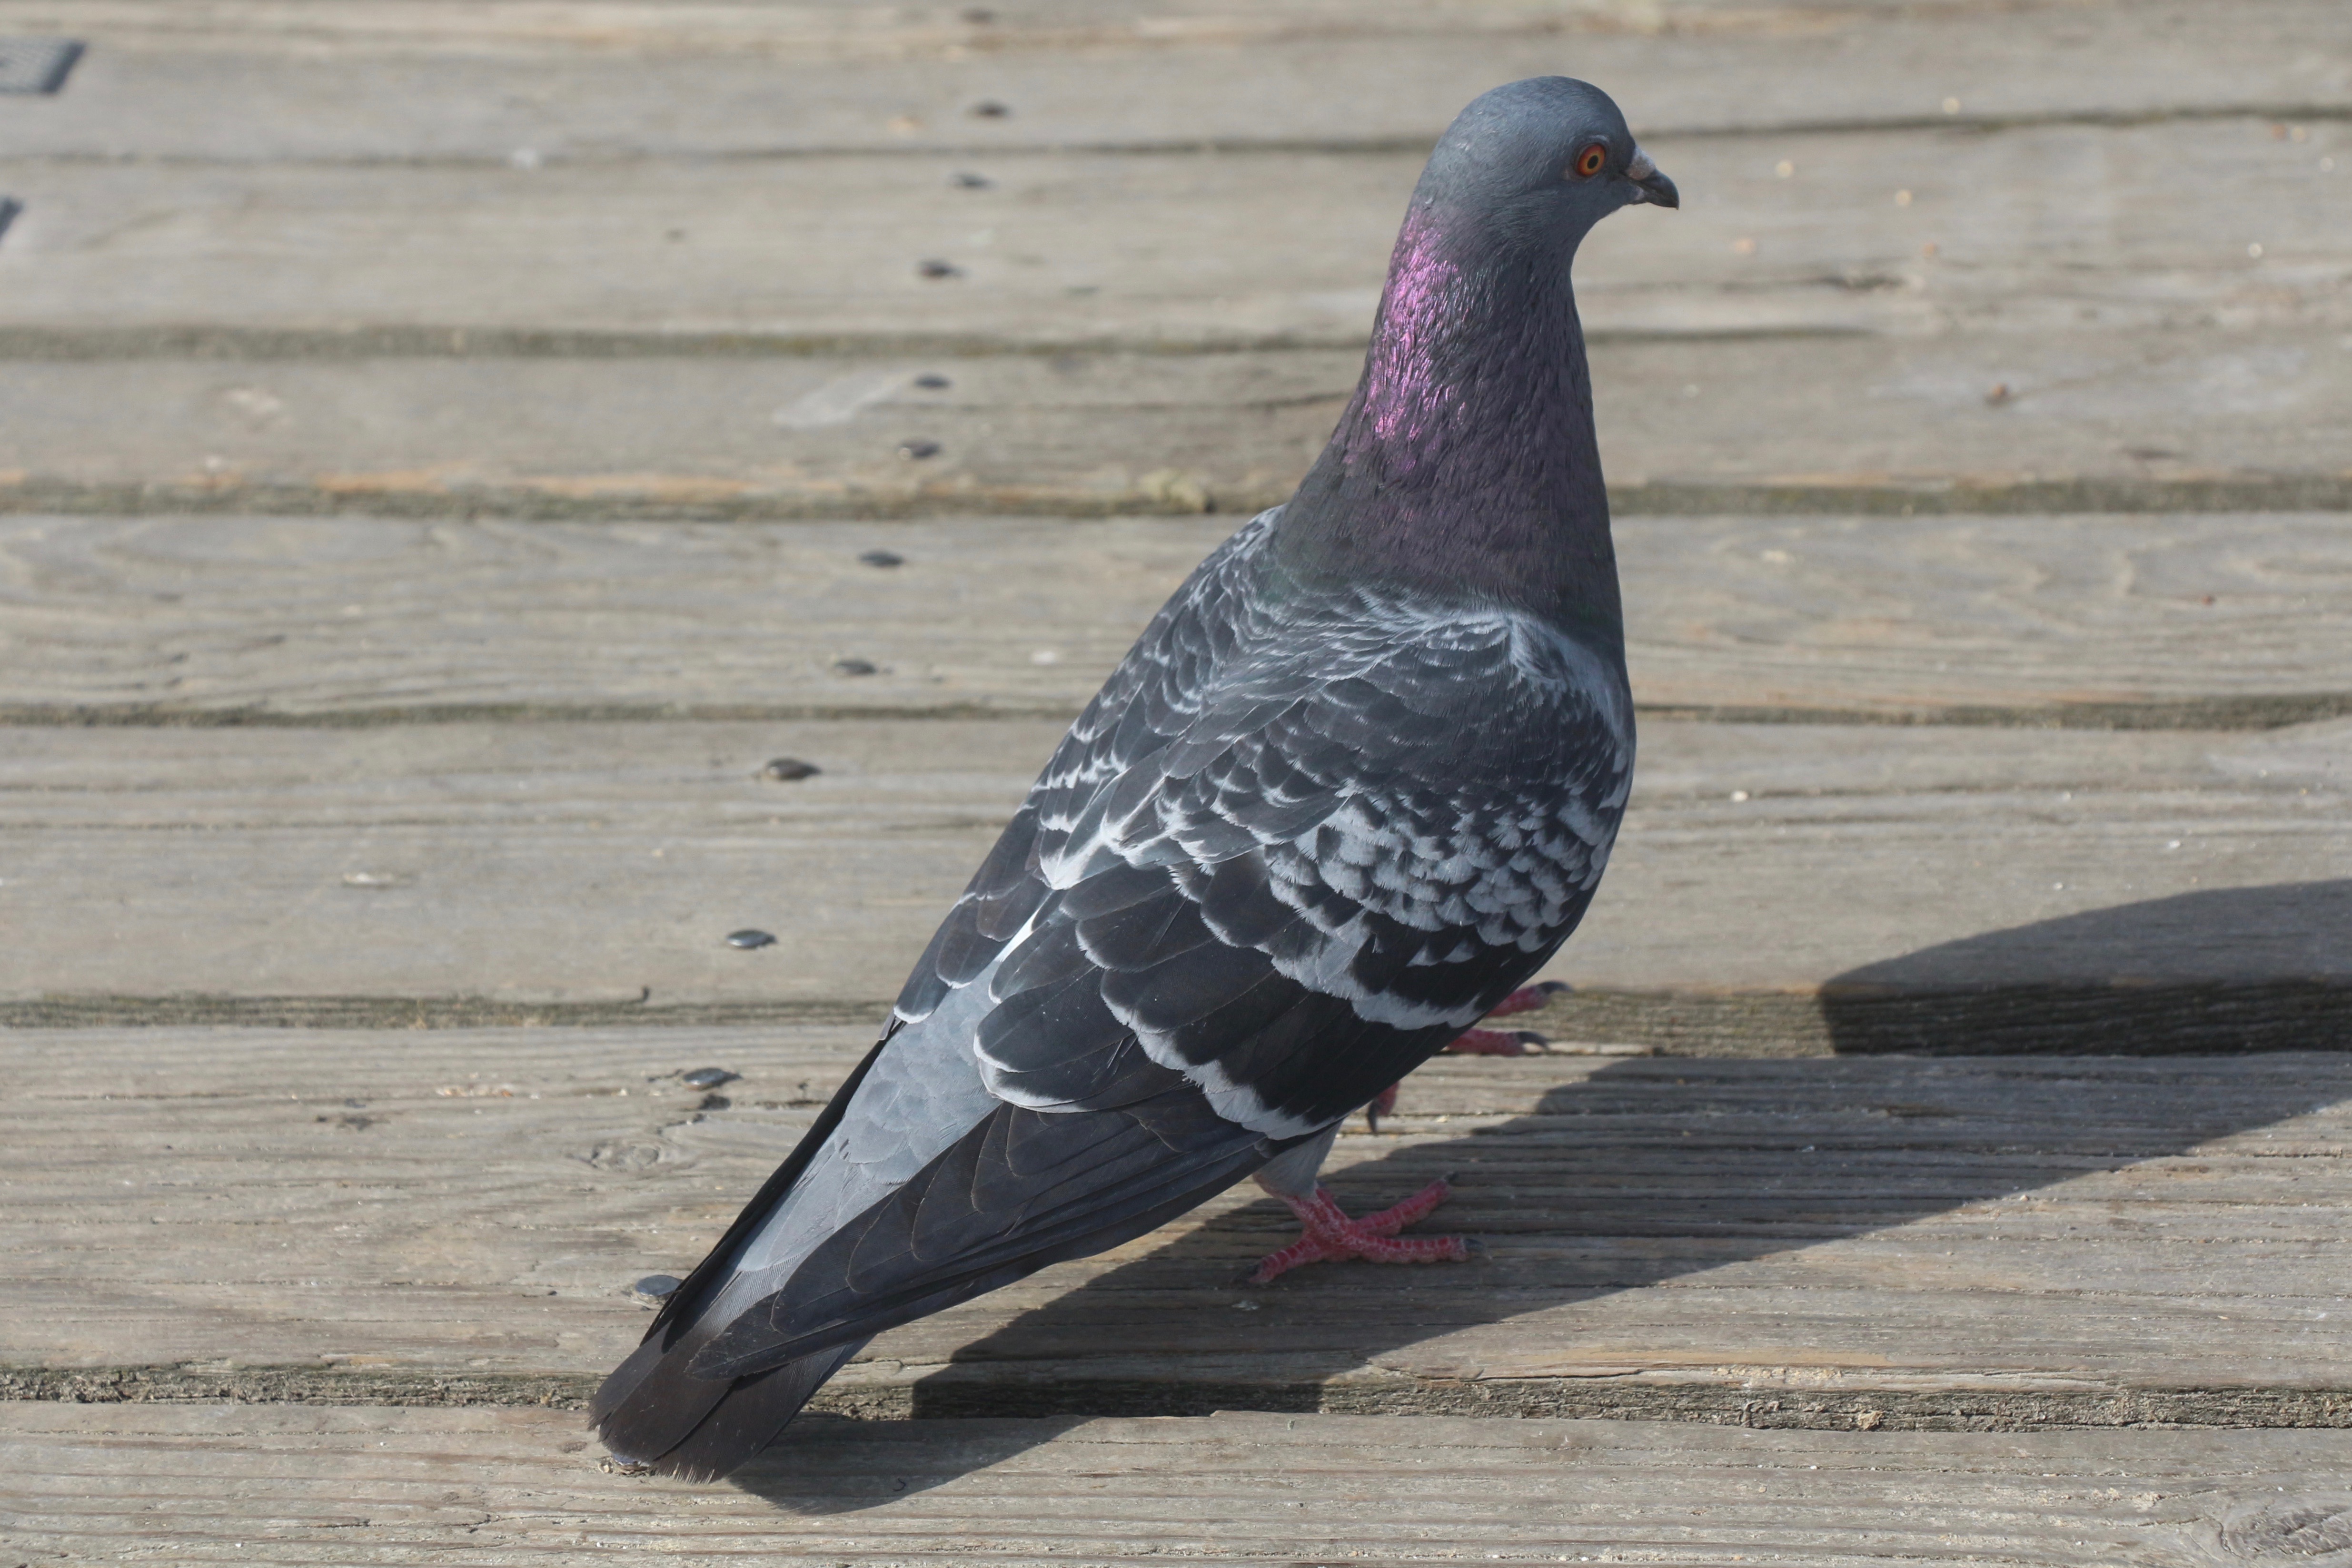 A pigeon (grey bird with black on the tips of its feathers) but from this angle you can see a purple sheen on the back of its neck because it's facing away from the camera.
